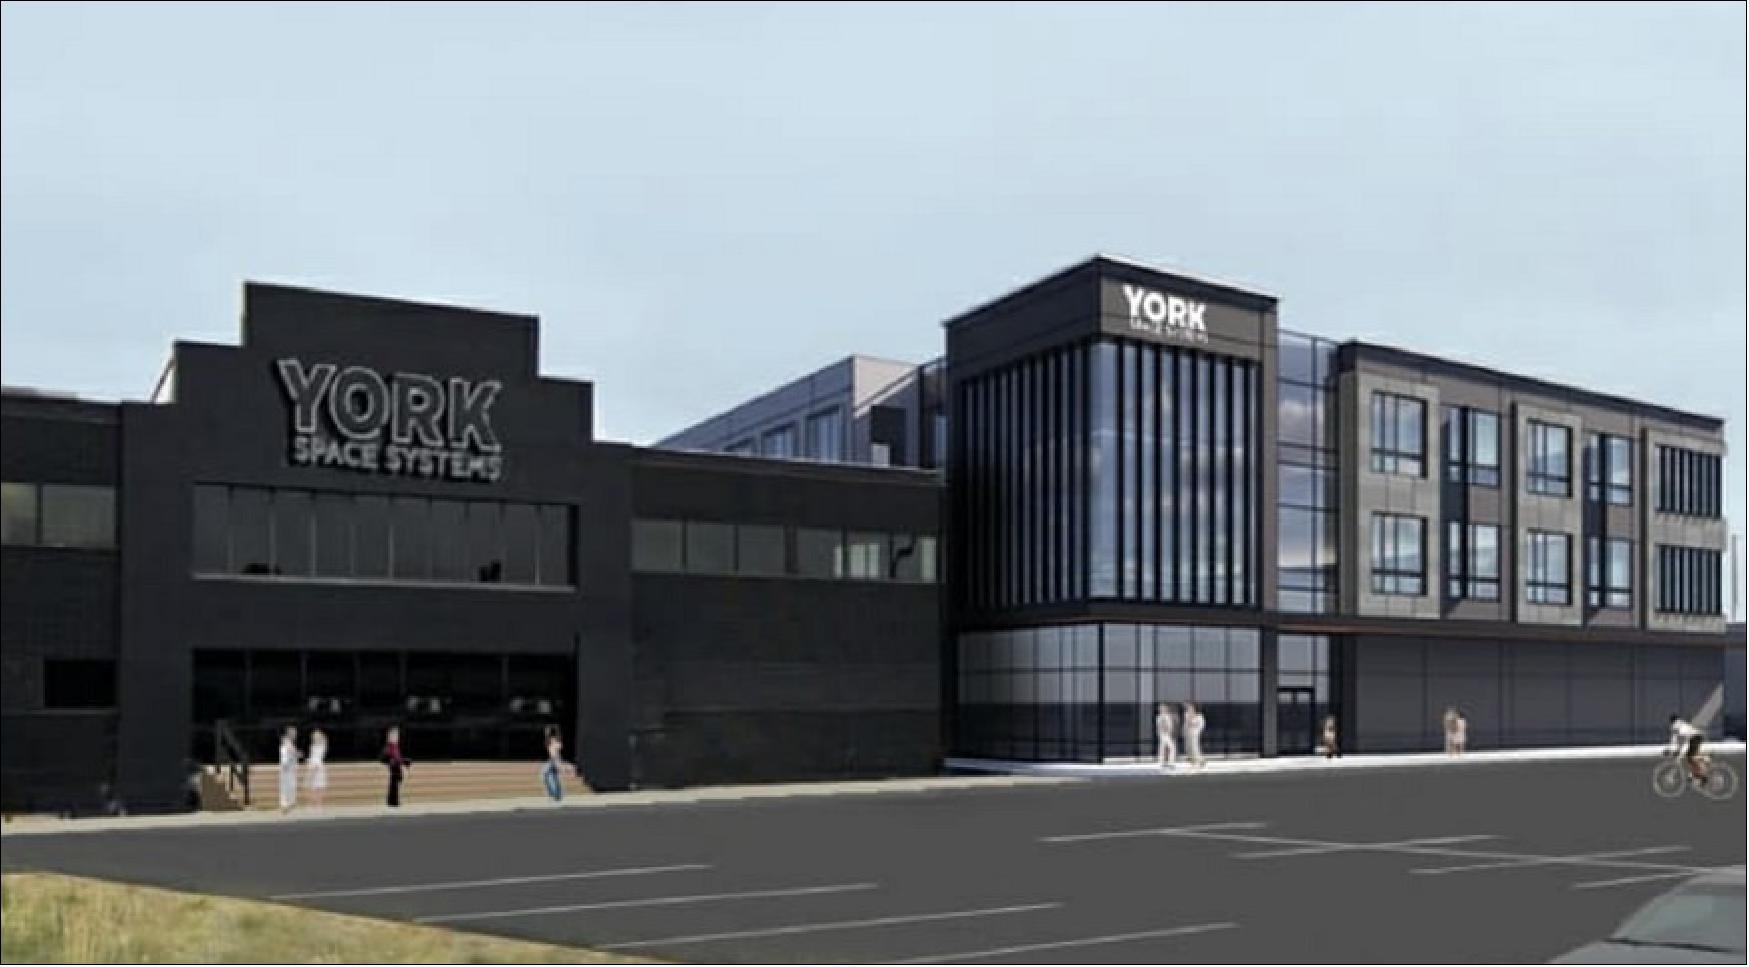 Figure 9: Rendering of York Space Systems new manufacturing facility in Denver, Colorado (image credit: York Space Systems)